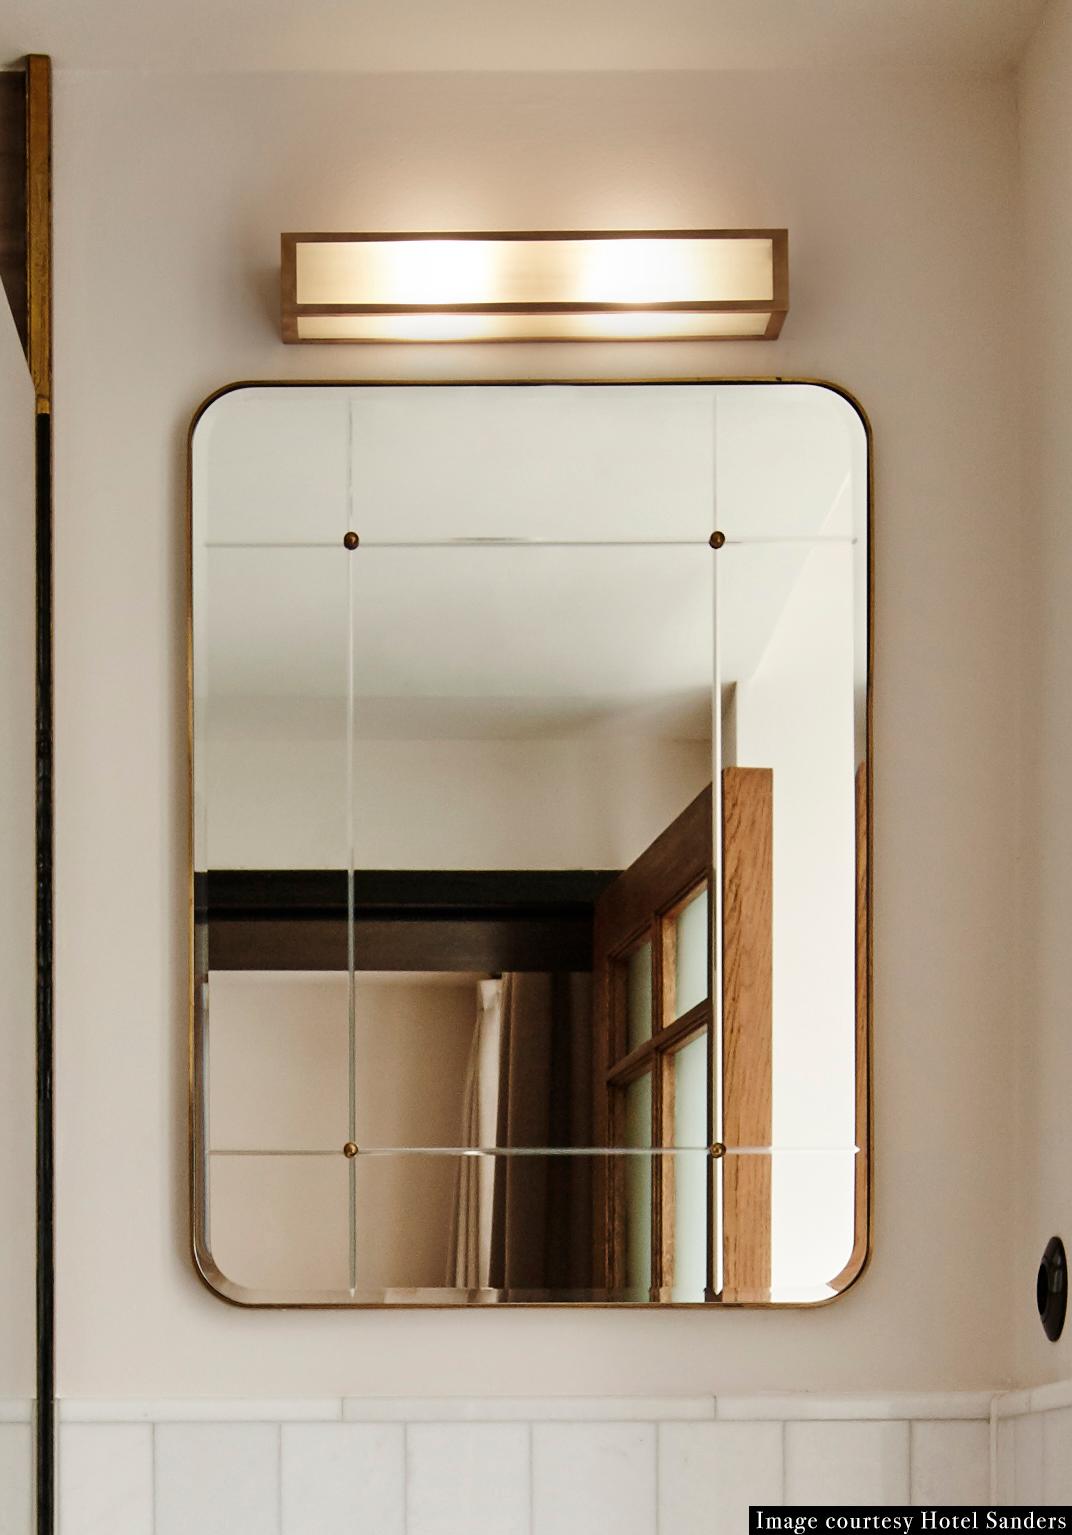 Bathroom mirror for Sanders by Lind + Almond in cut glass and brass, large a mirror in cut-glass and hand patinated brass, with brass studs. Developed especially for Sanders, Copenhagen's premier luxury boutique hotel.

Available in two sizes.